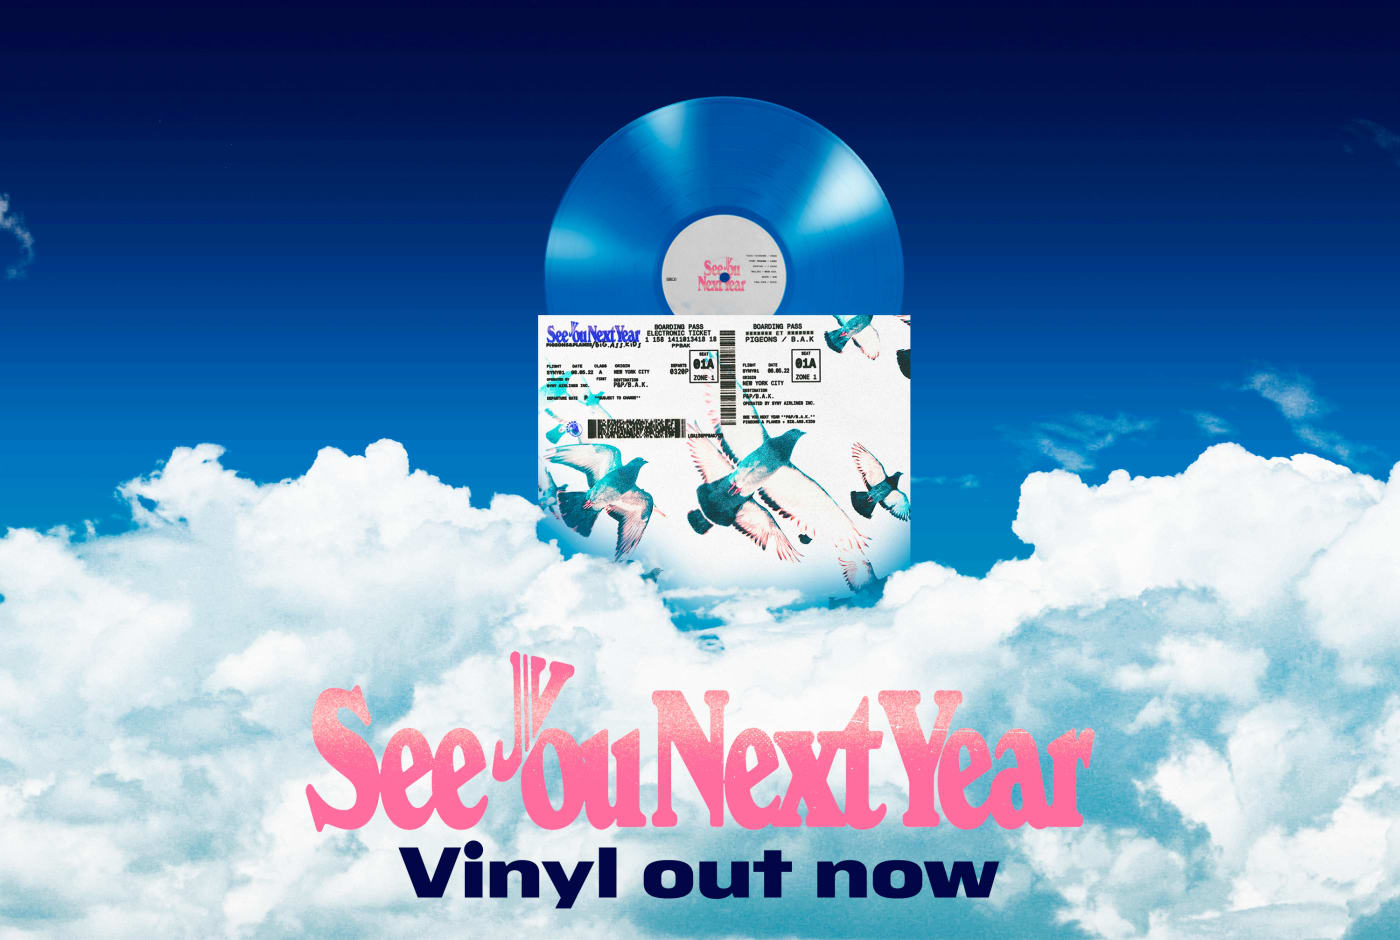 see you next year vinyl release